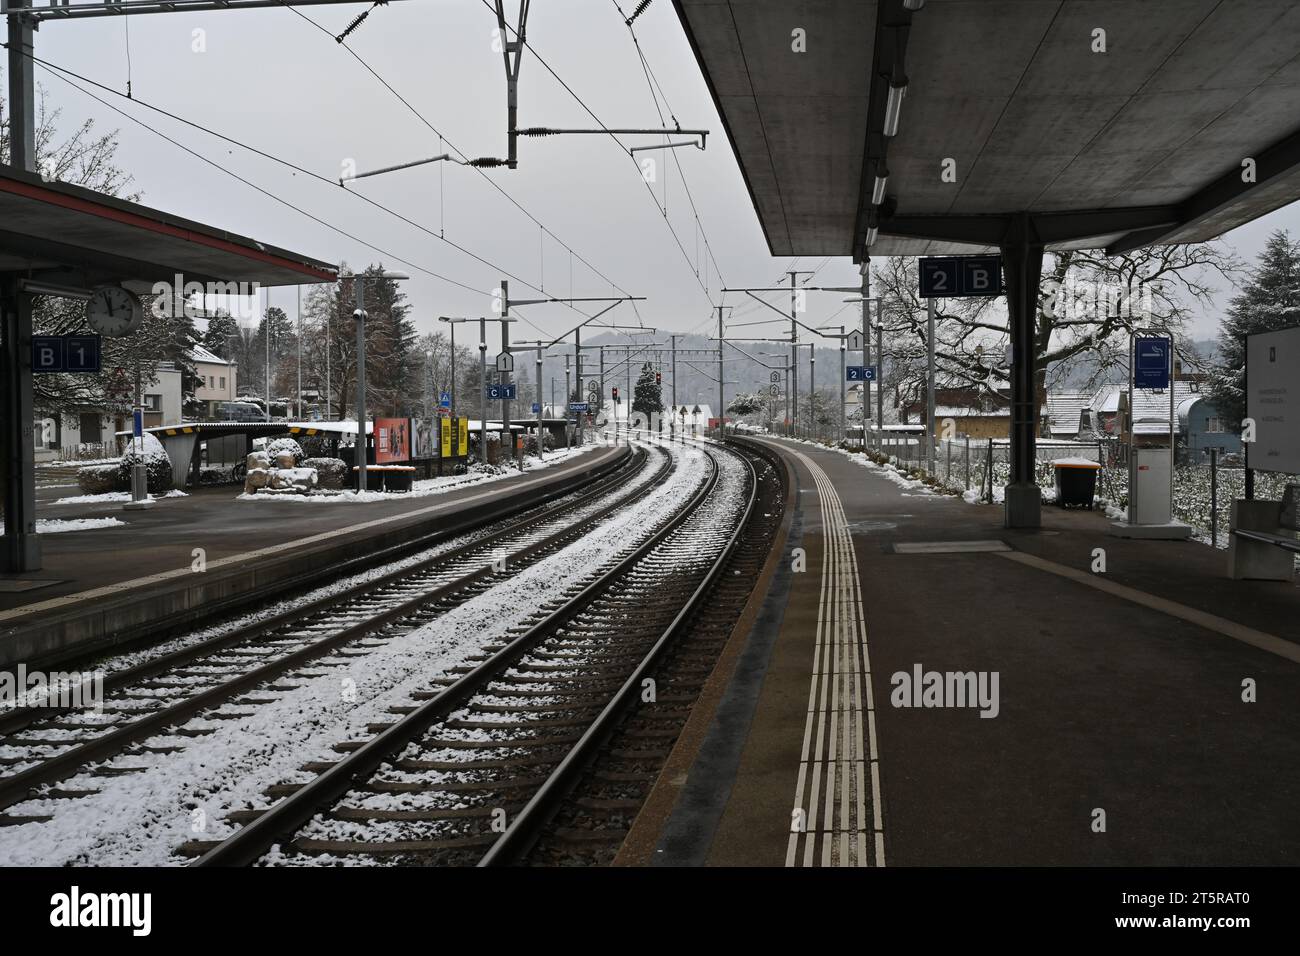 Railway platform and rails of a small village station in winter. There is snow on the railway tracks. Stock Photo